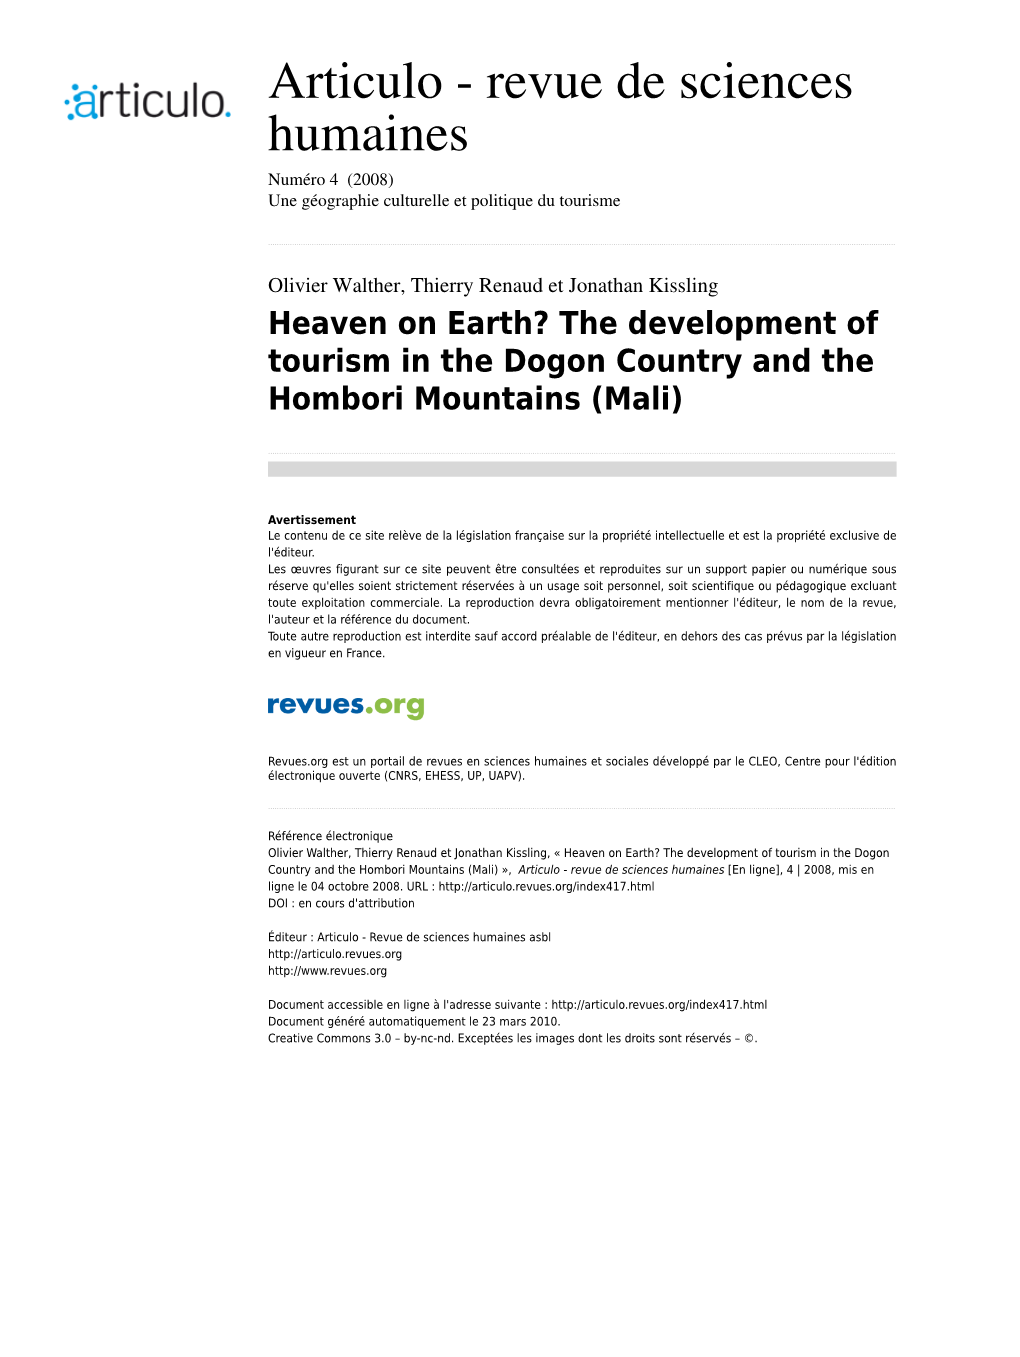 The Development of Tourism in the Dogon Country and the Hombori Mountains (Mali)